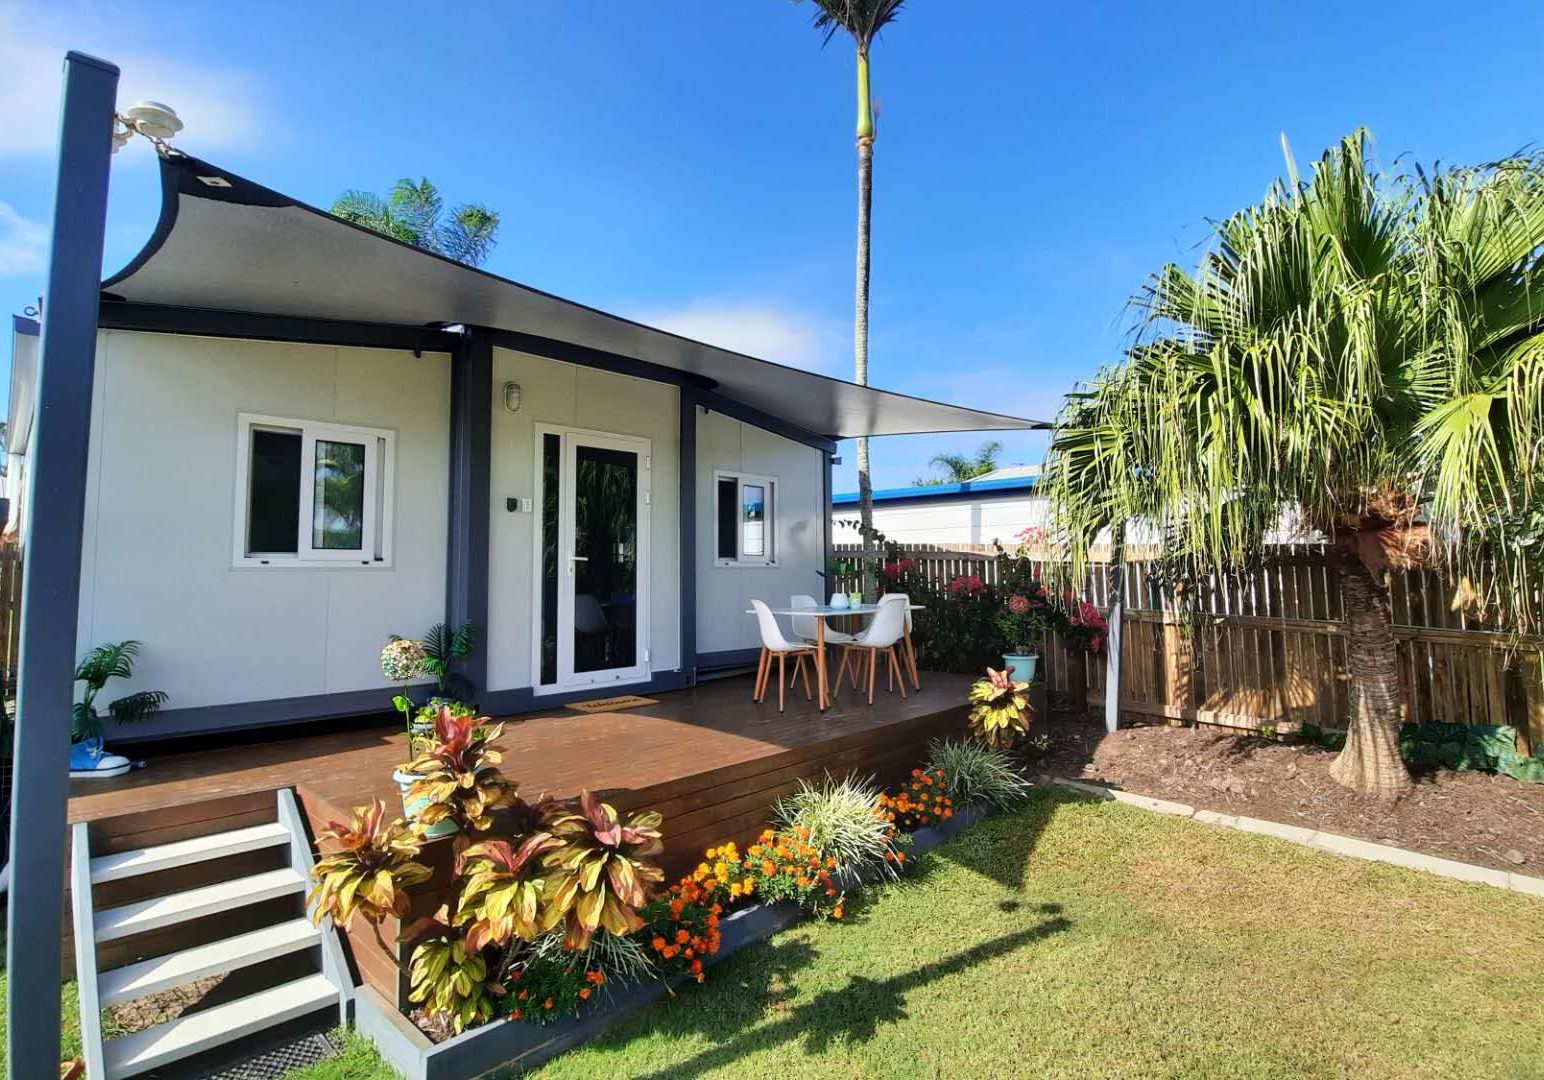 The Keppel 1 Bedroom Granny Flat with Deck and shade sail